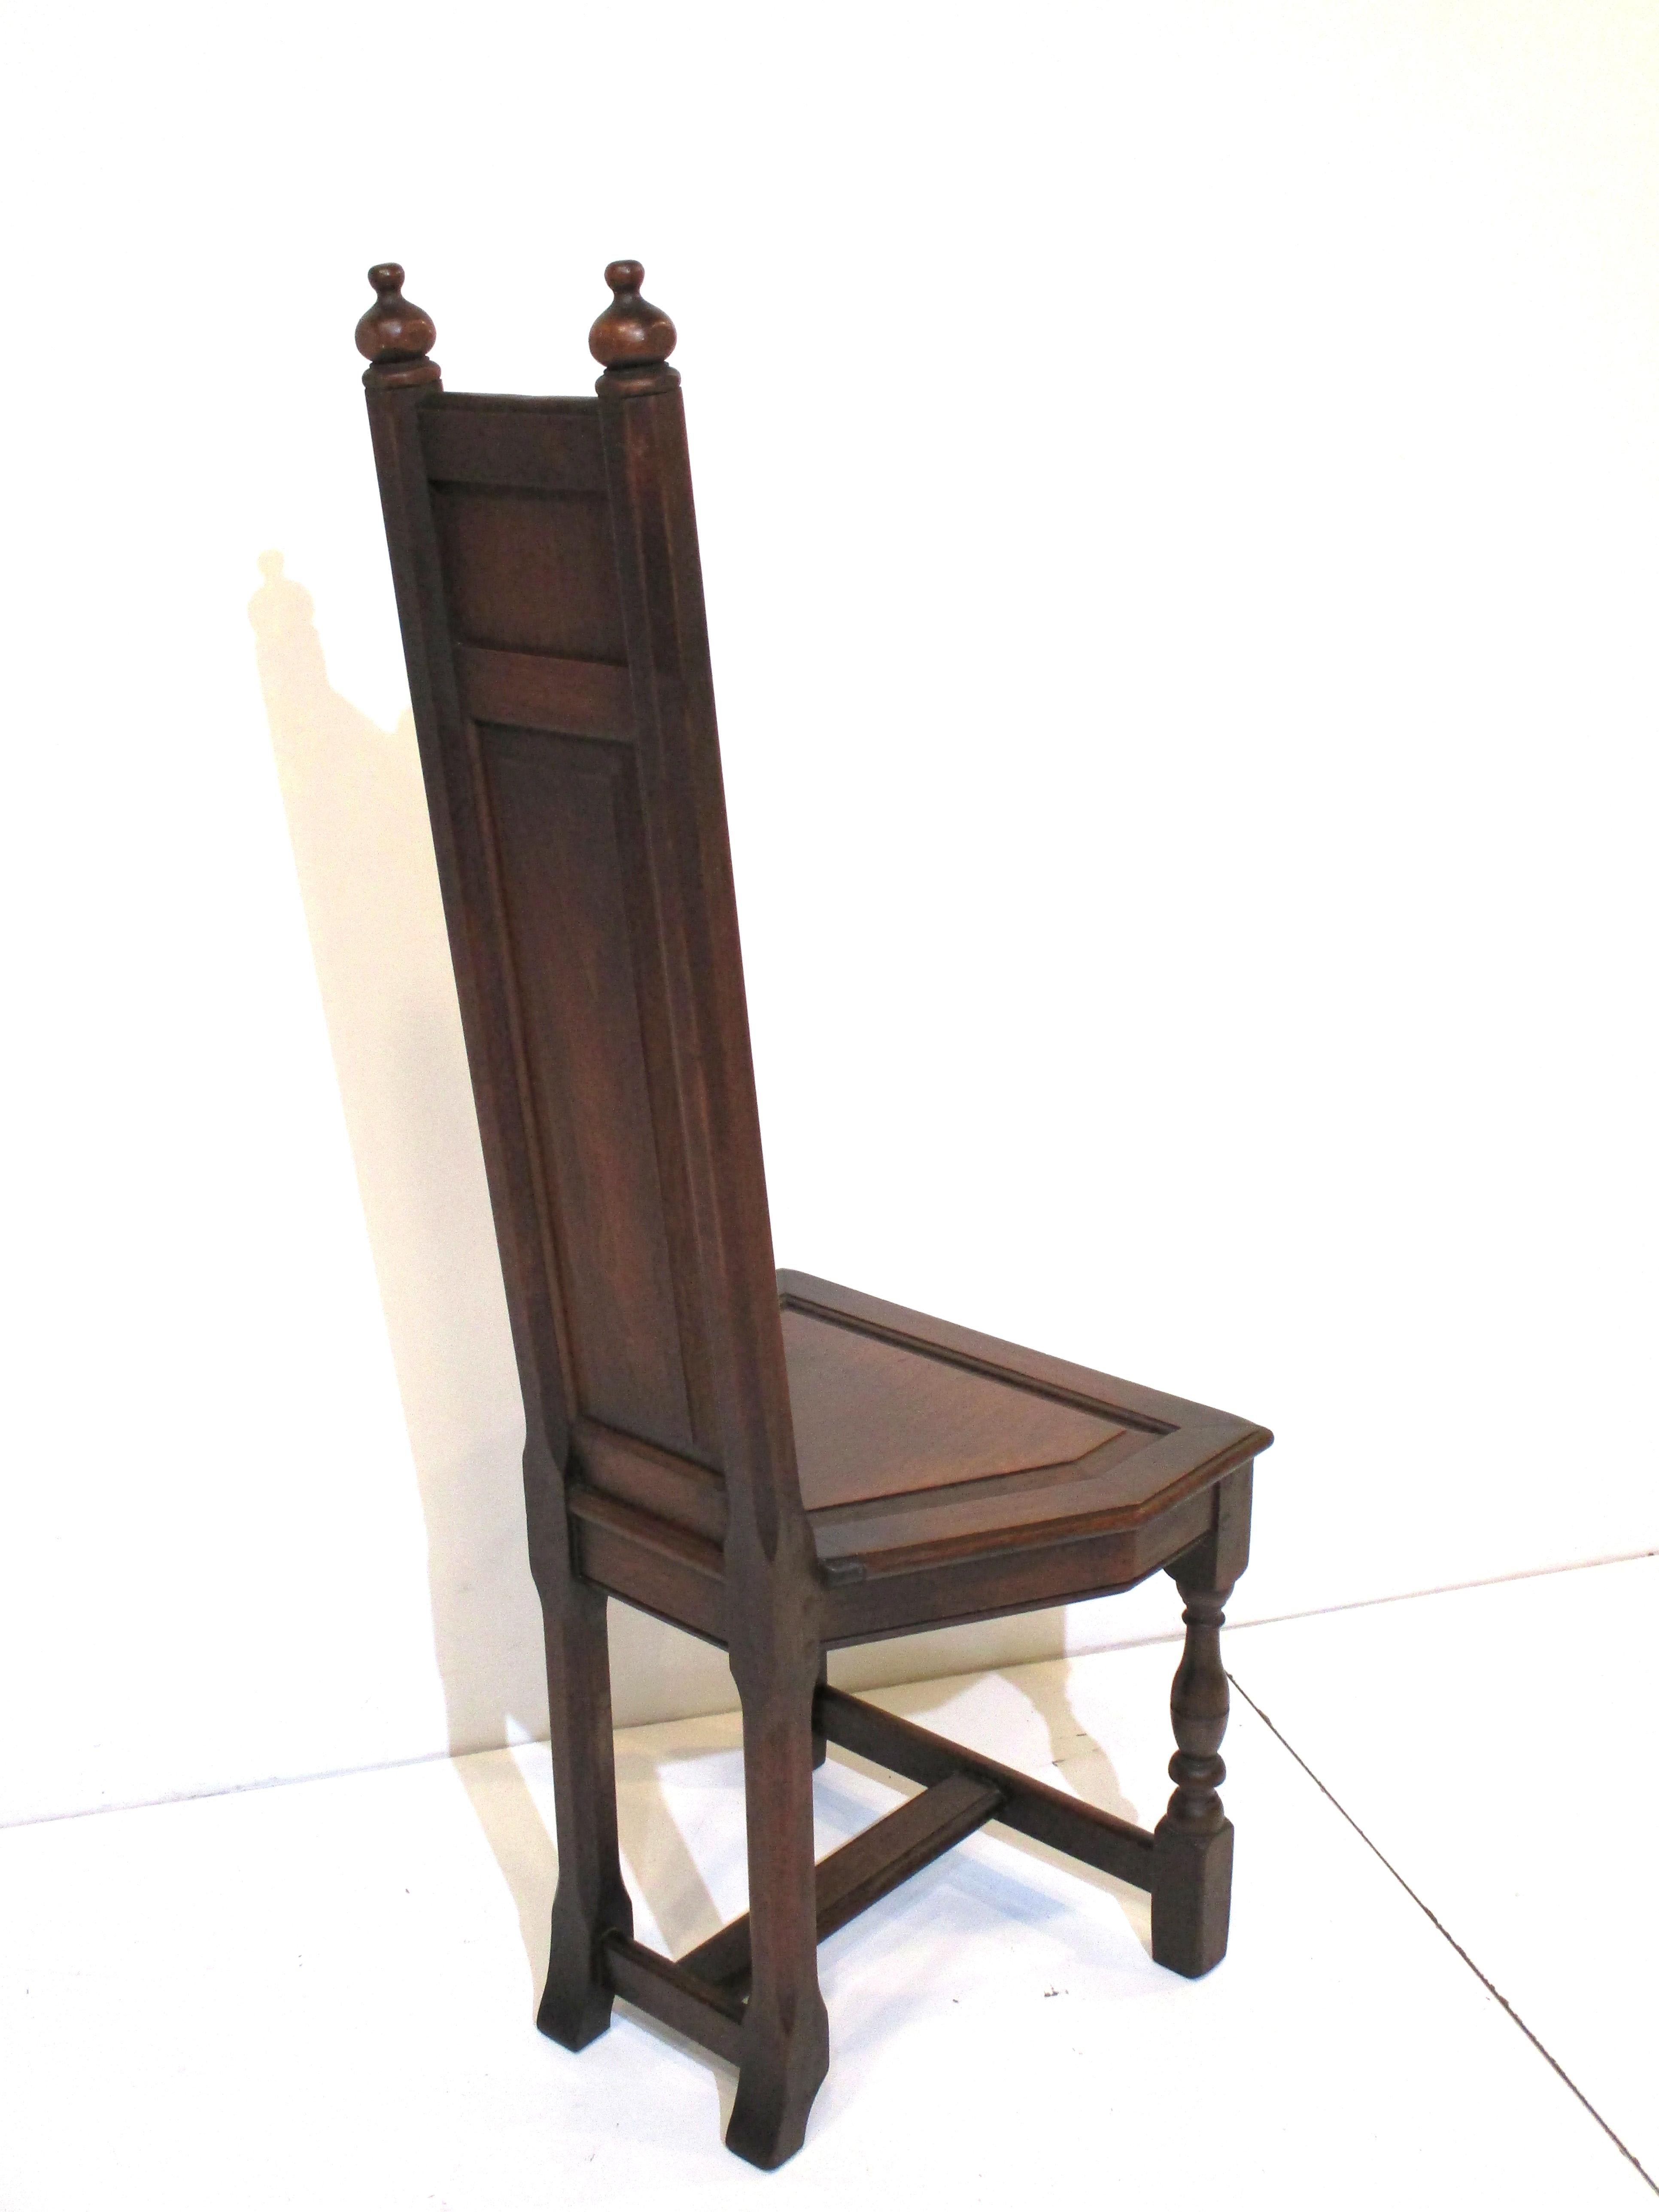 Gothic Revival Pair of Gothic Altar Chairs by Kittinger